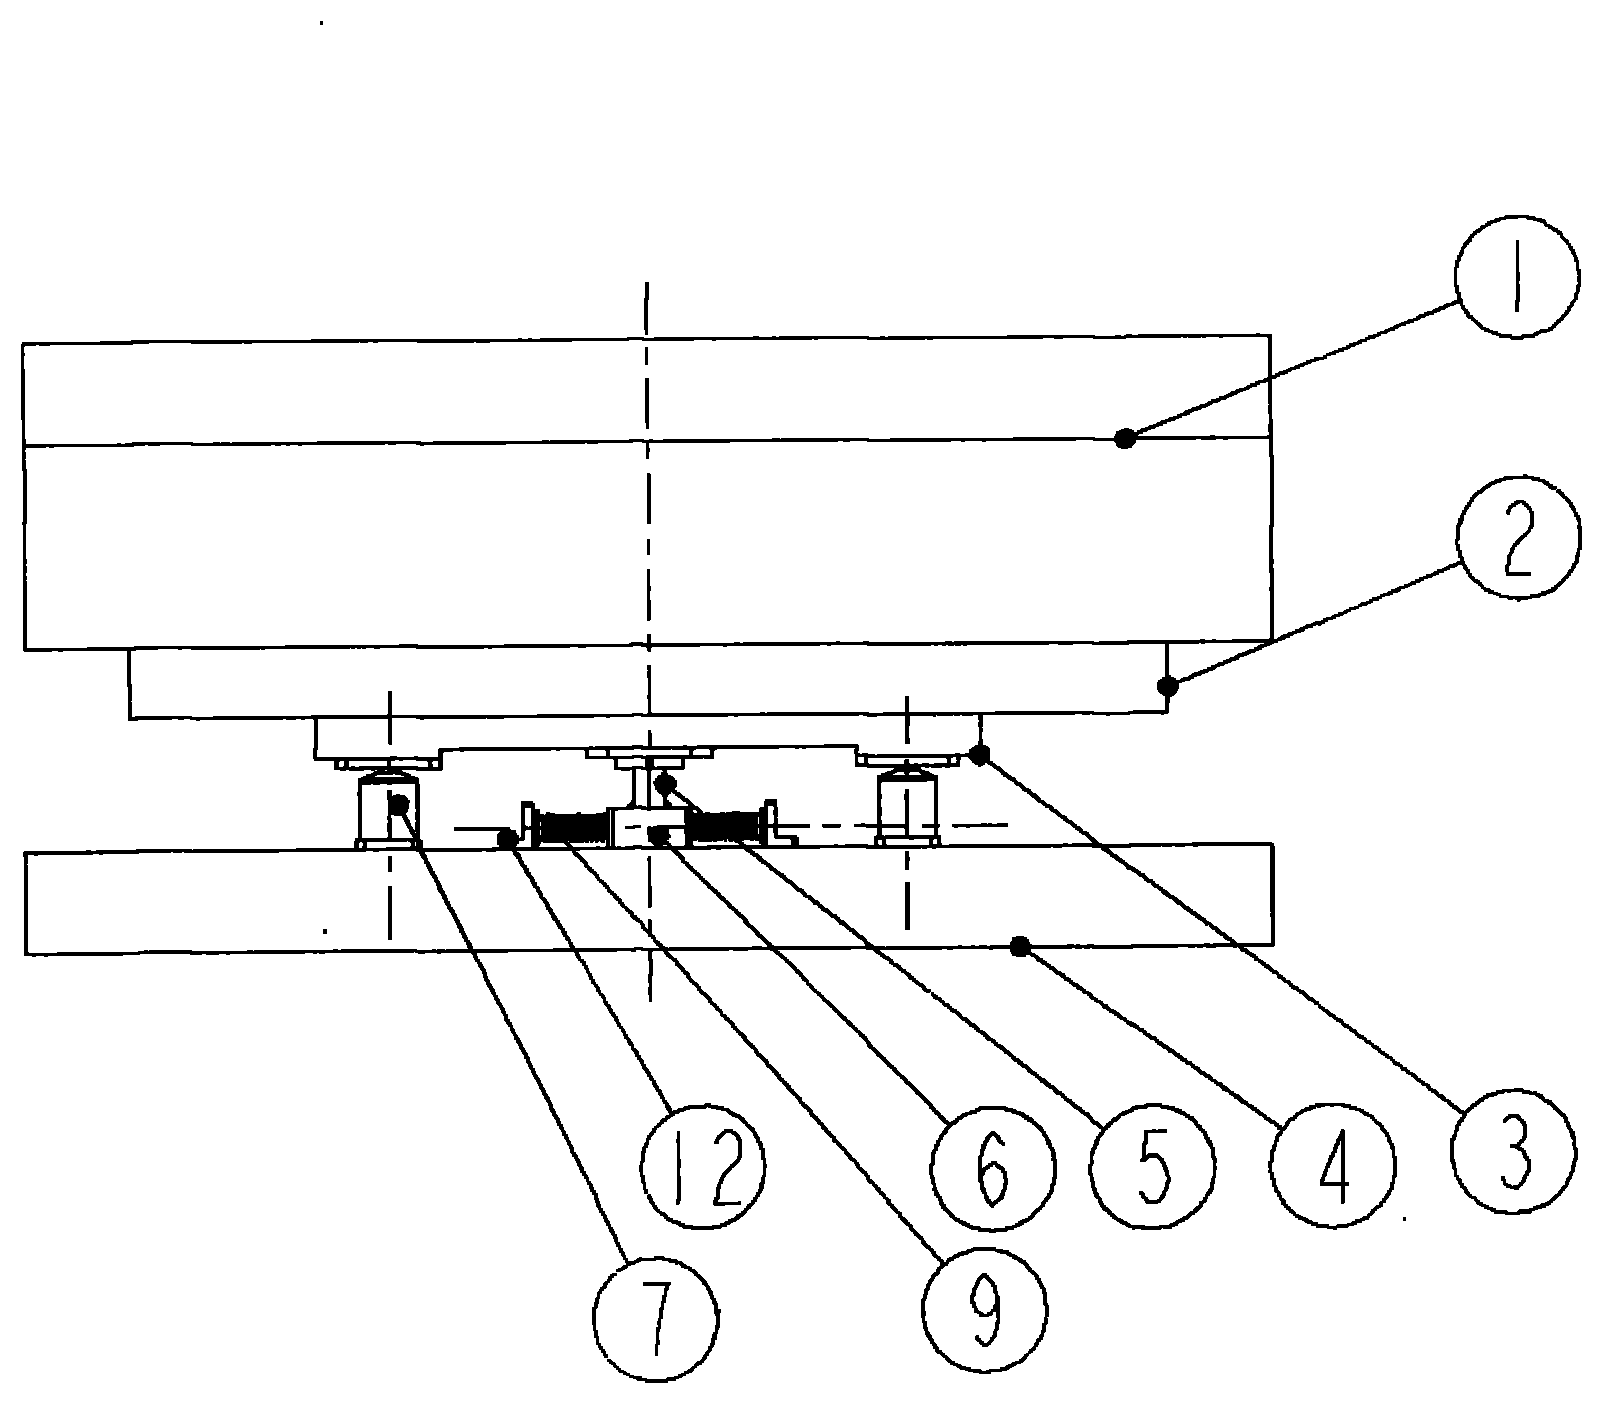 Floating platform capable of automatically resetting